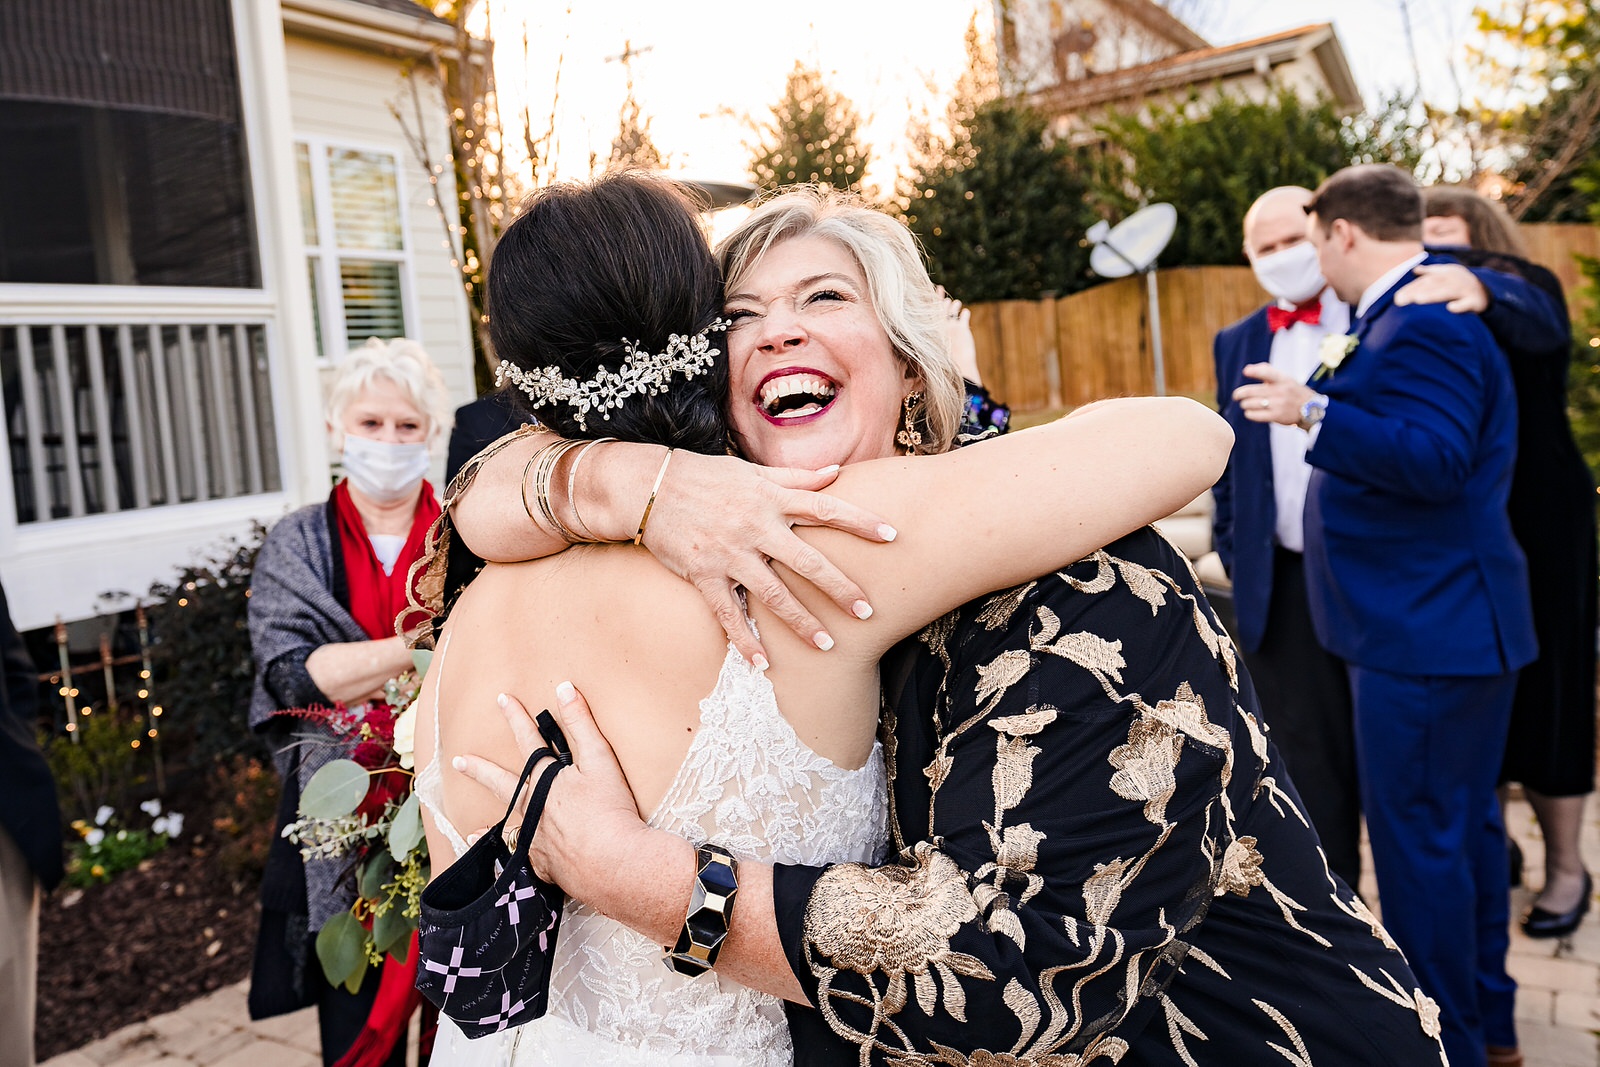 Who are you going to hug first after your wedding ceremony?